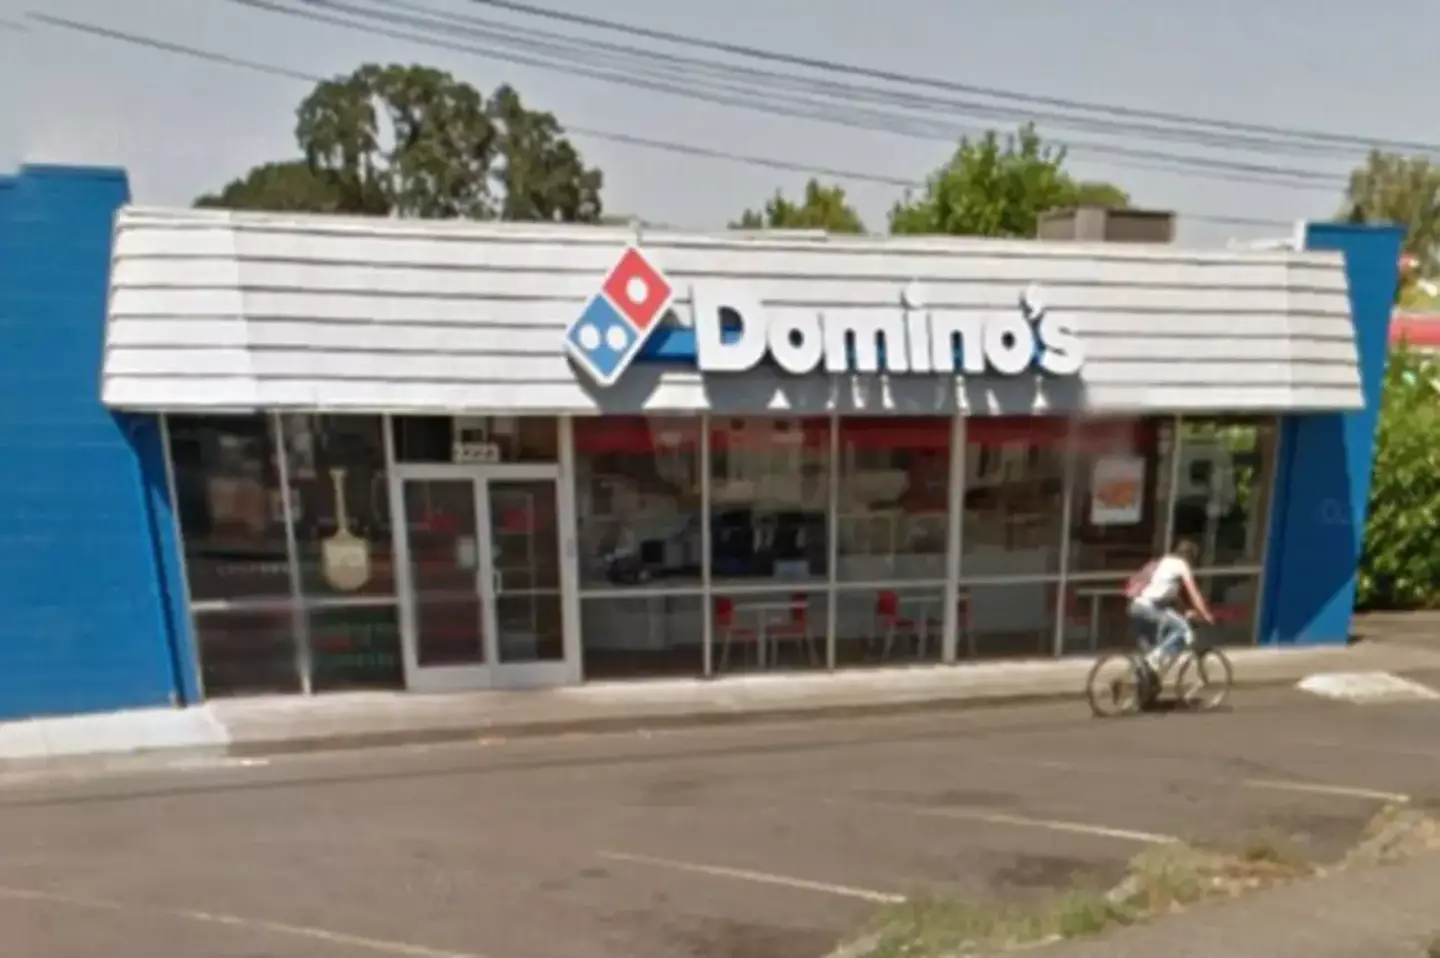 The staff at Domino's Pizza in Salem, Oregon, were concerned when he didn't order.